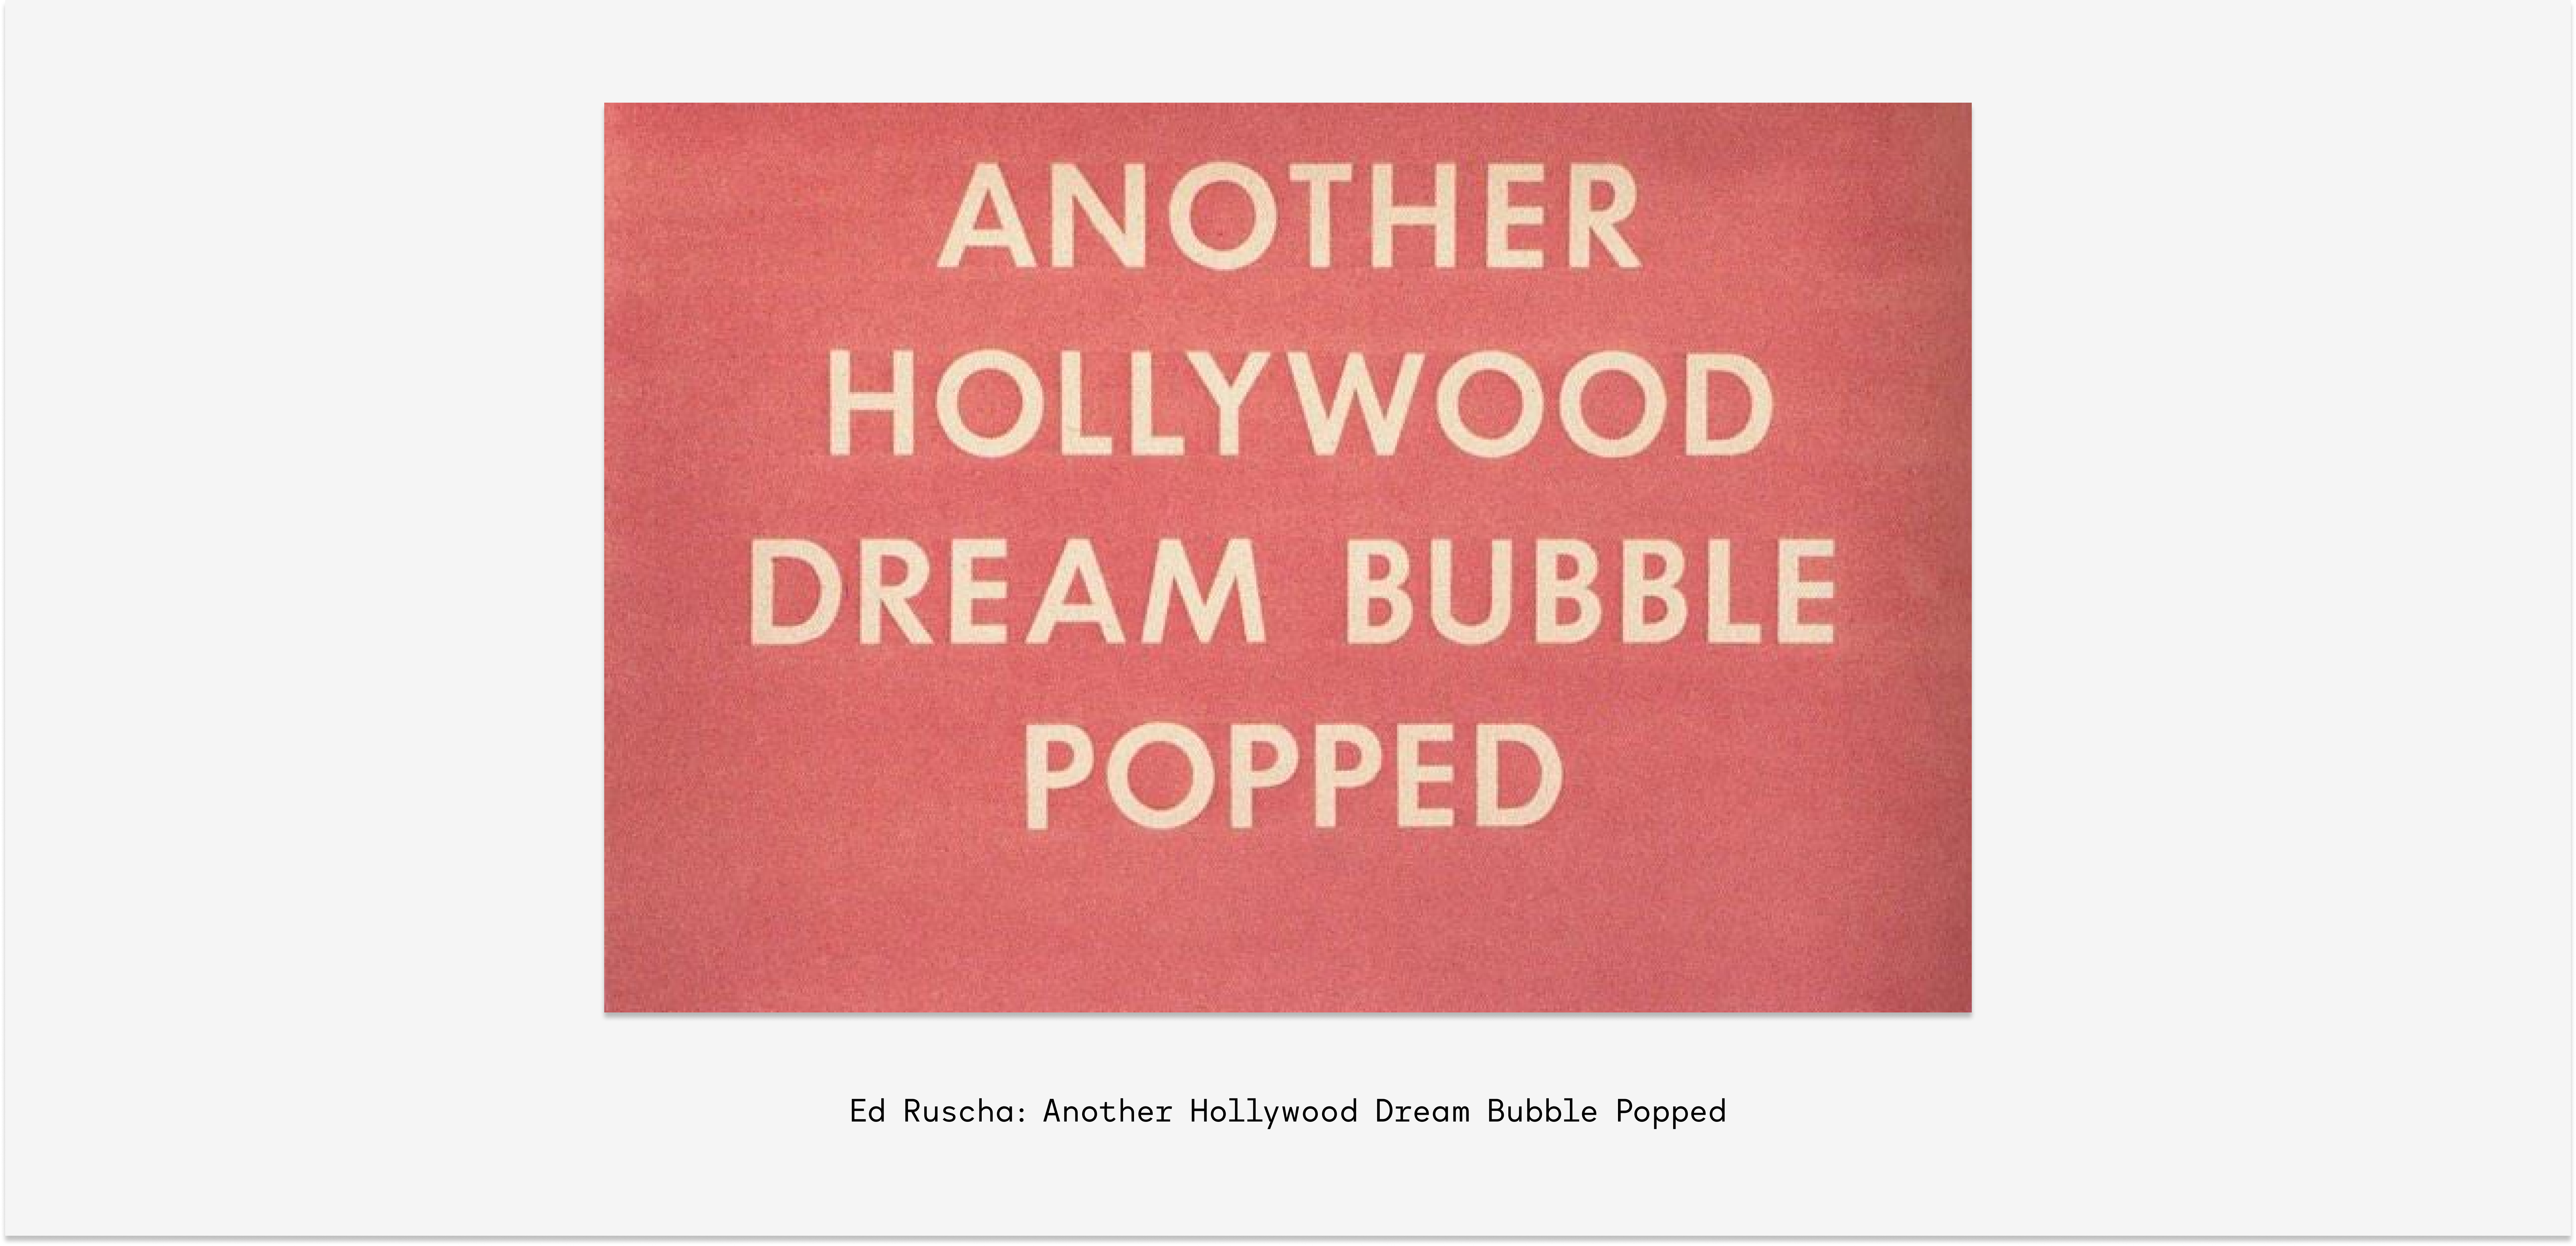 Ed Ruscha, _Another Hollywood Dream Bubble Popped.jpg